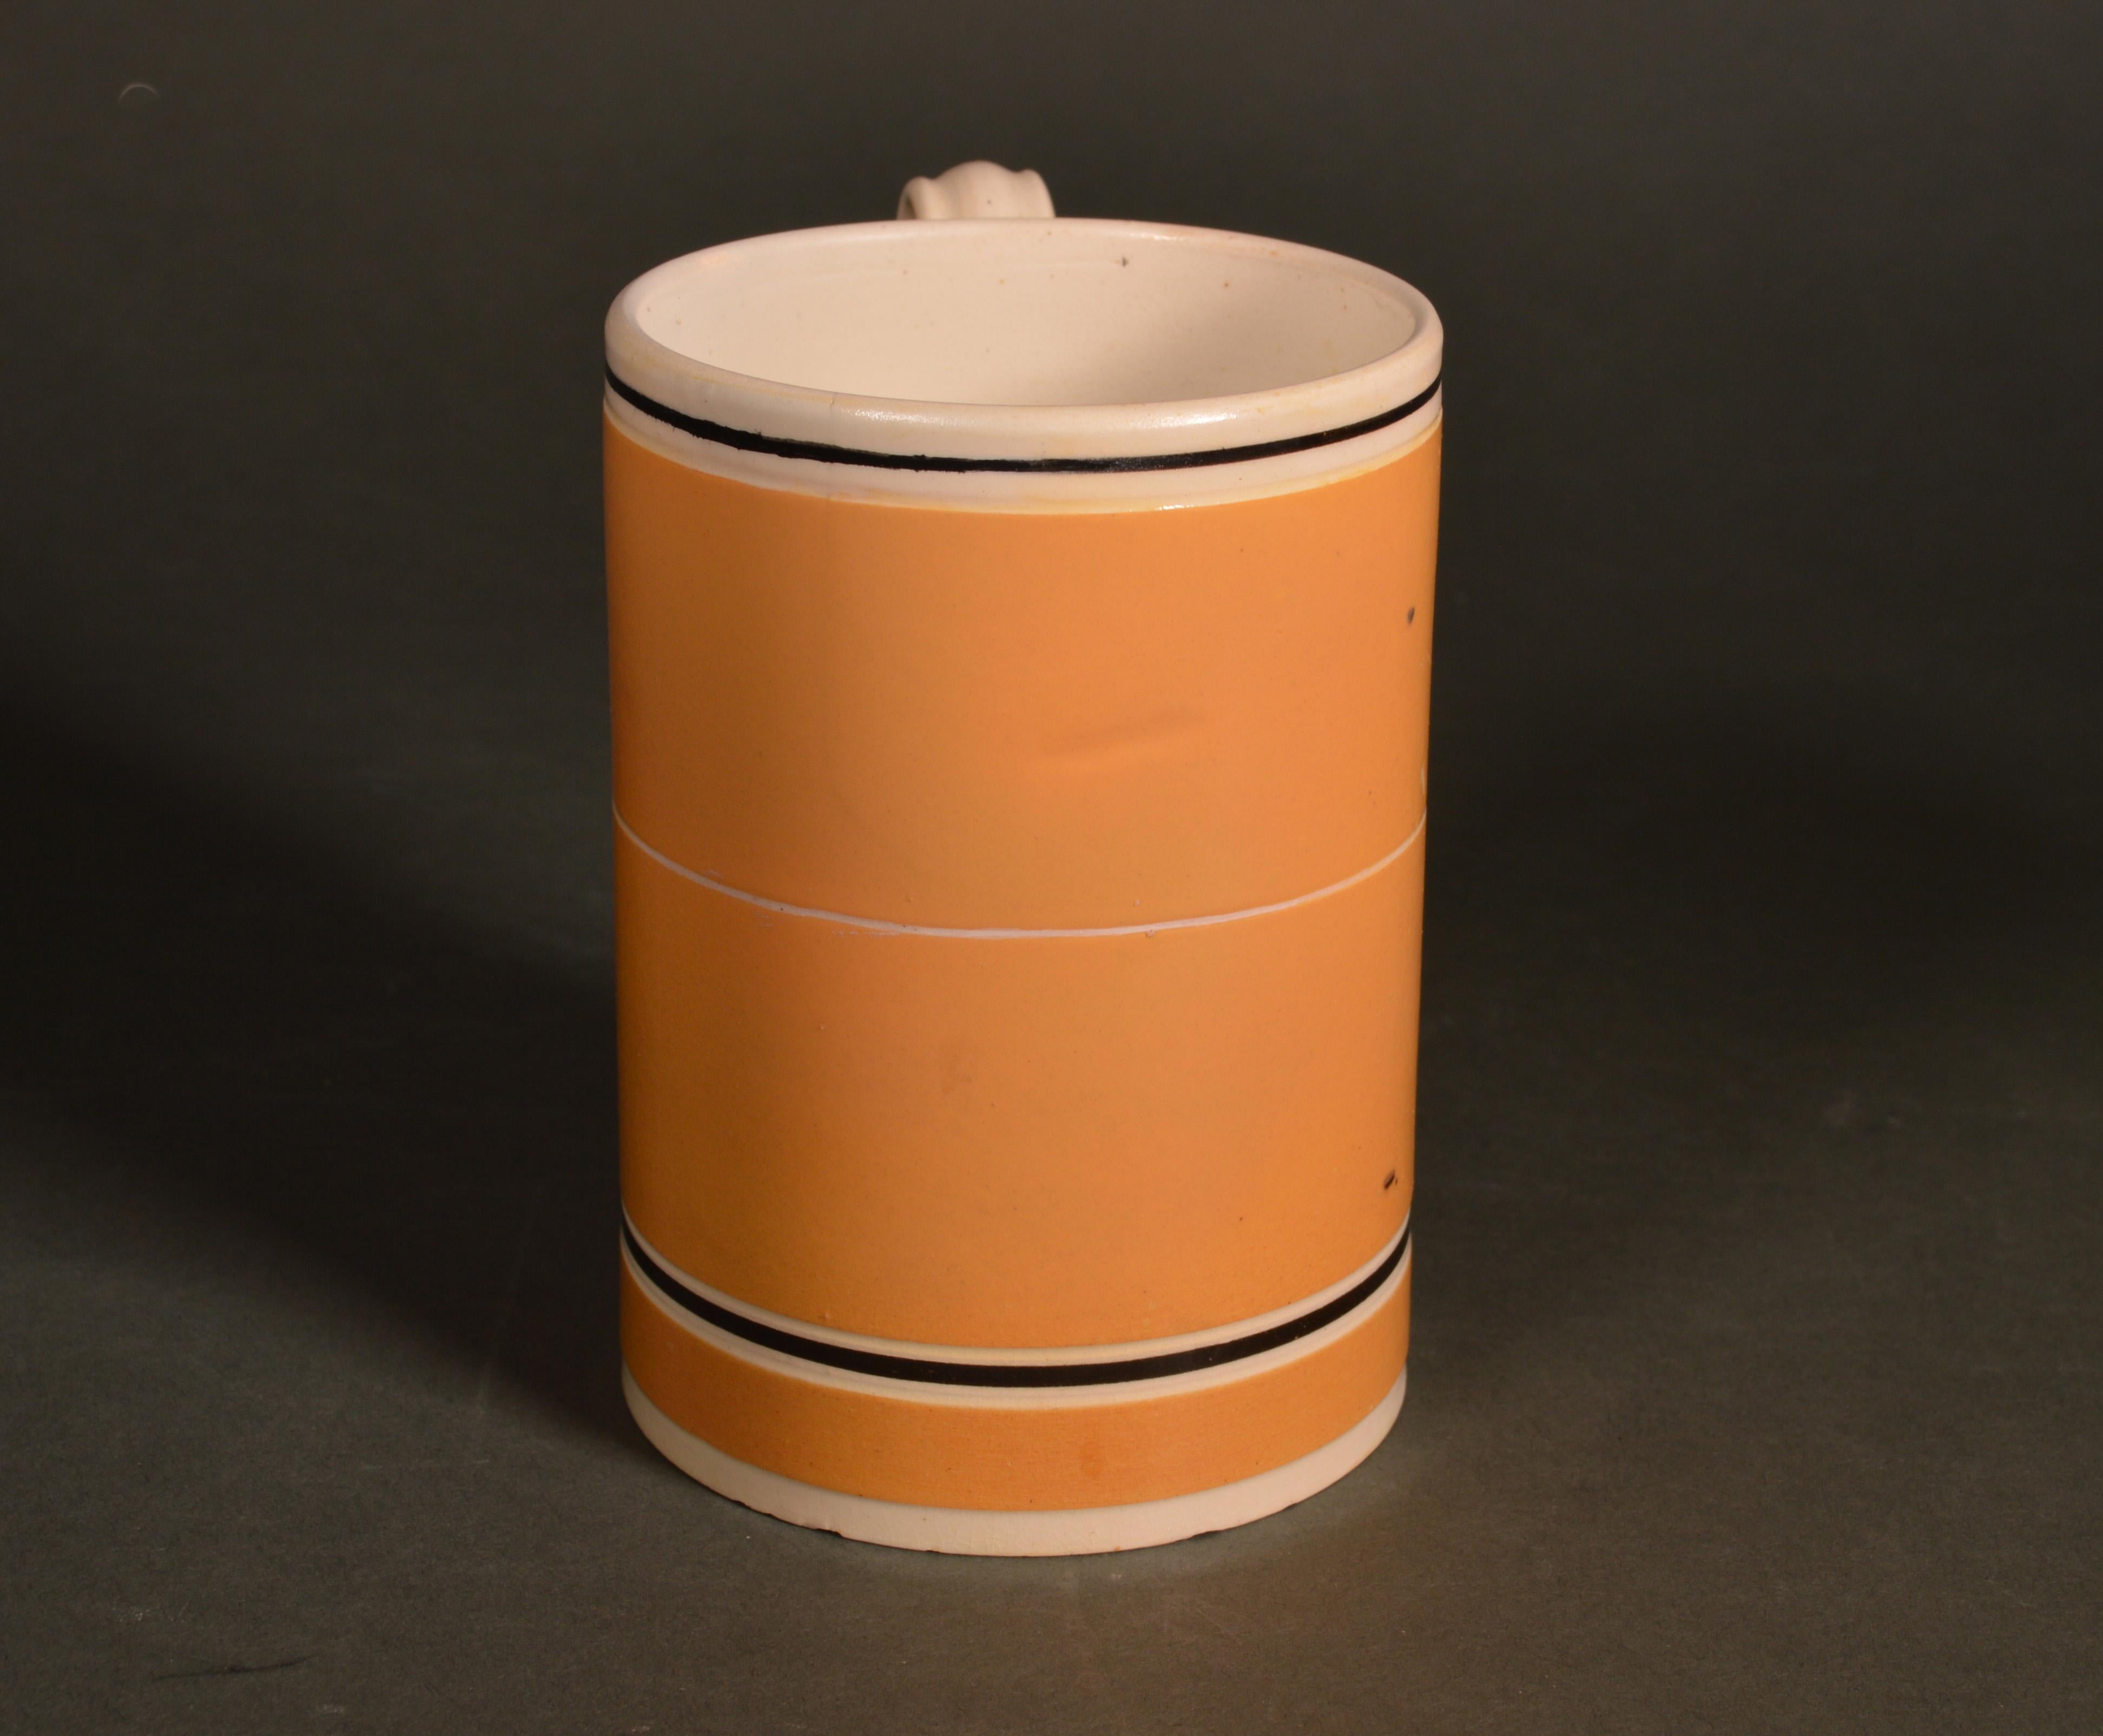 Mocha pottery mug with ochre slip ground,
circa 1790-1810
  

The cylindrical mug with a flared foot has an ochre-colored slip ground with a wide white band at the rim with a narrow brown line encircling the body. Another narrower white band is